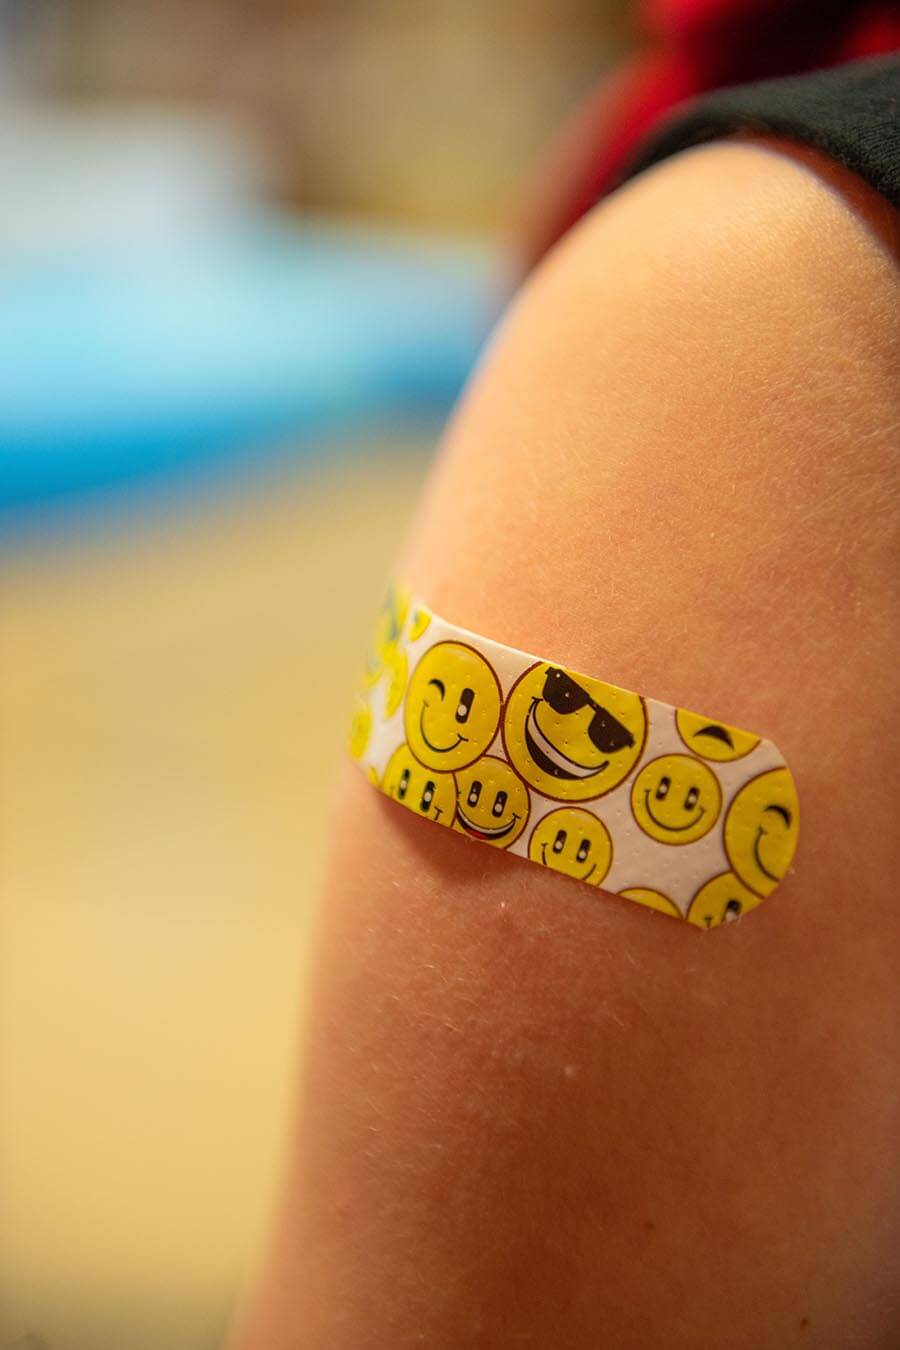 A vaccine recipient shows off their bandage